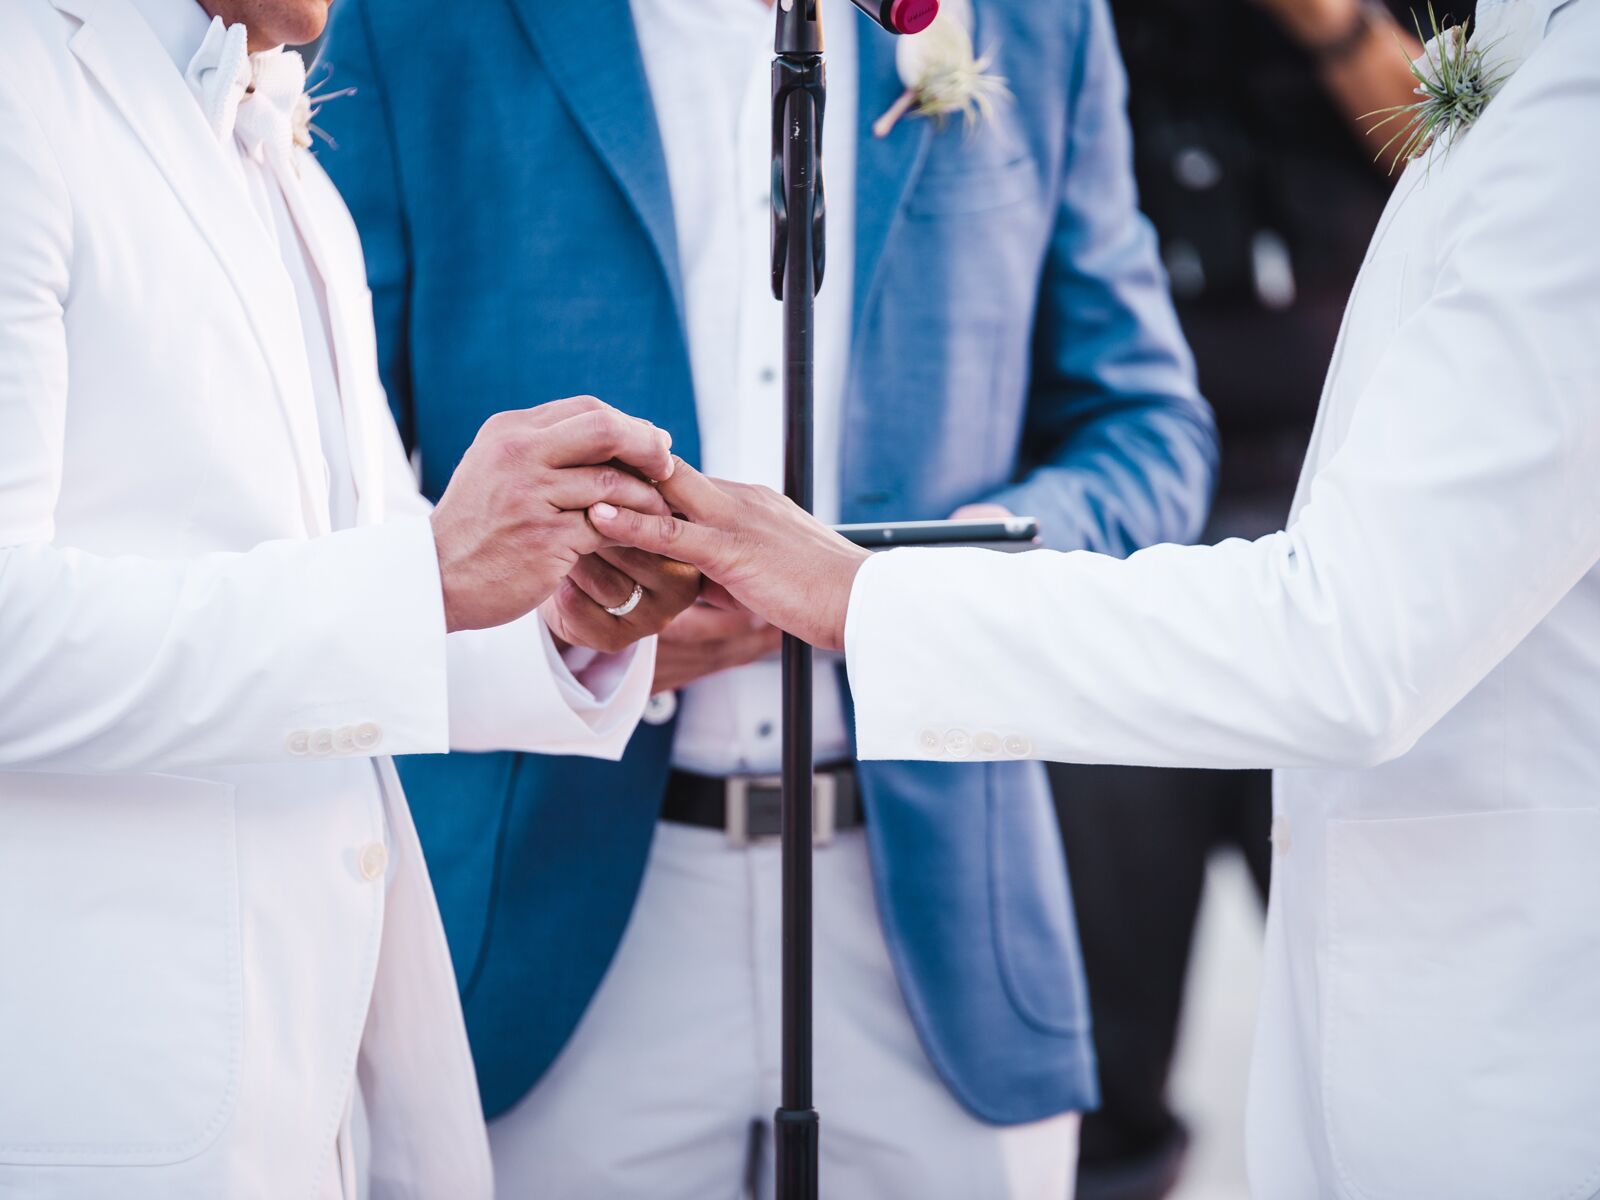 Traditional Wedding Vows From Various Religions